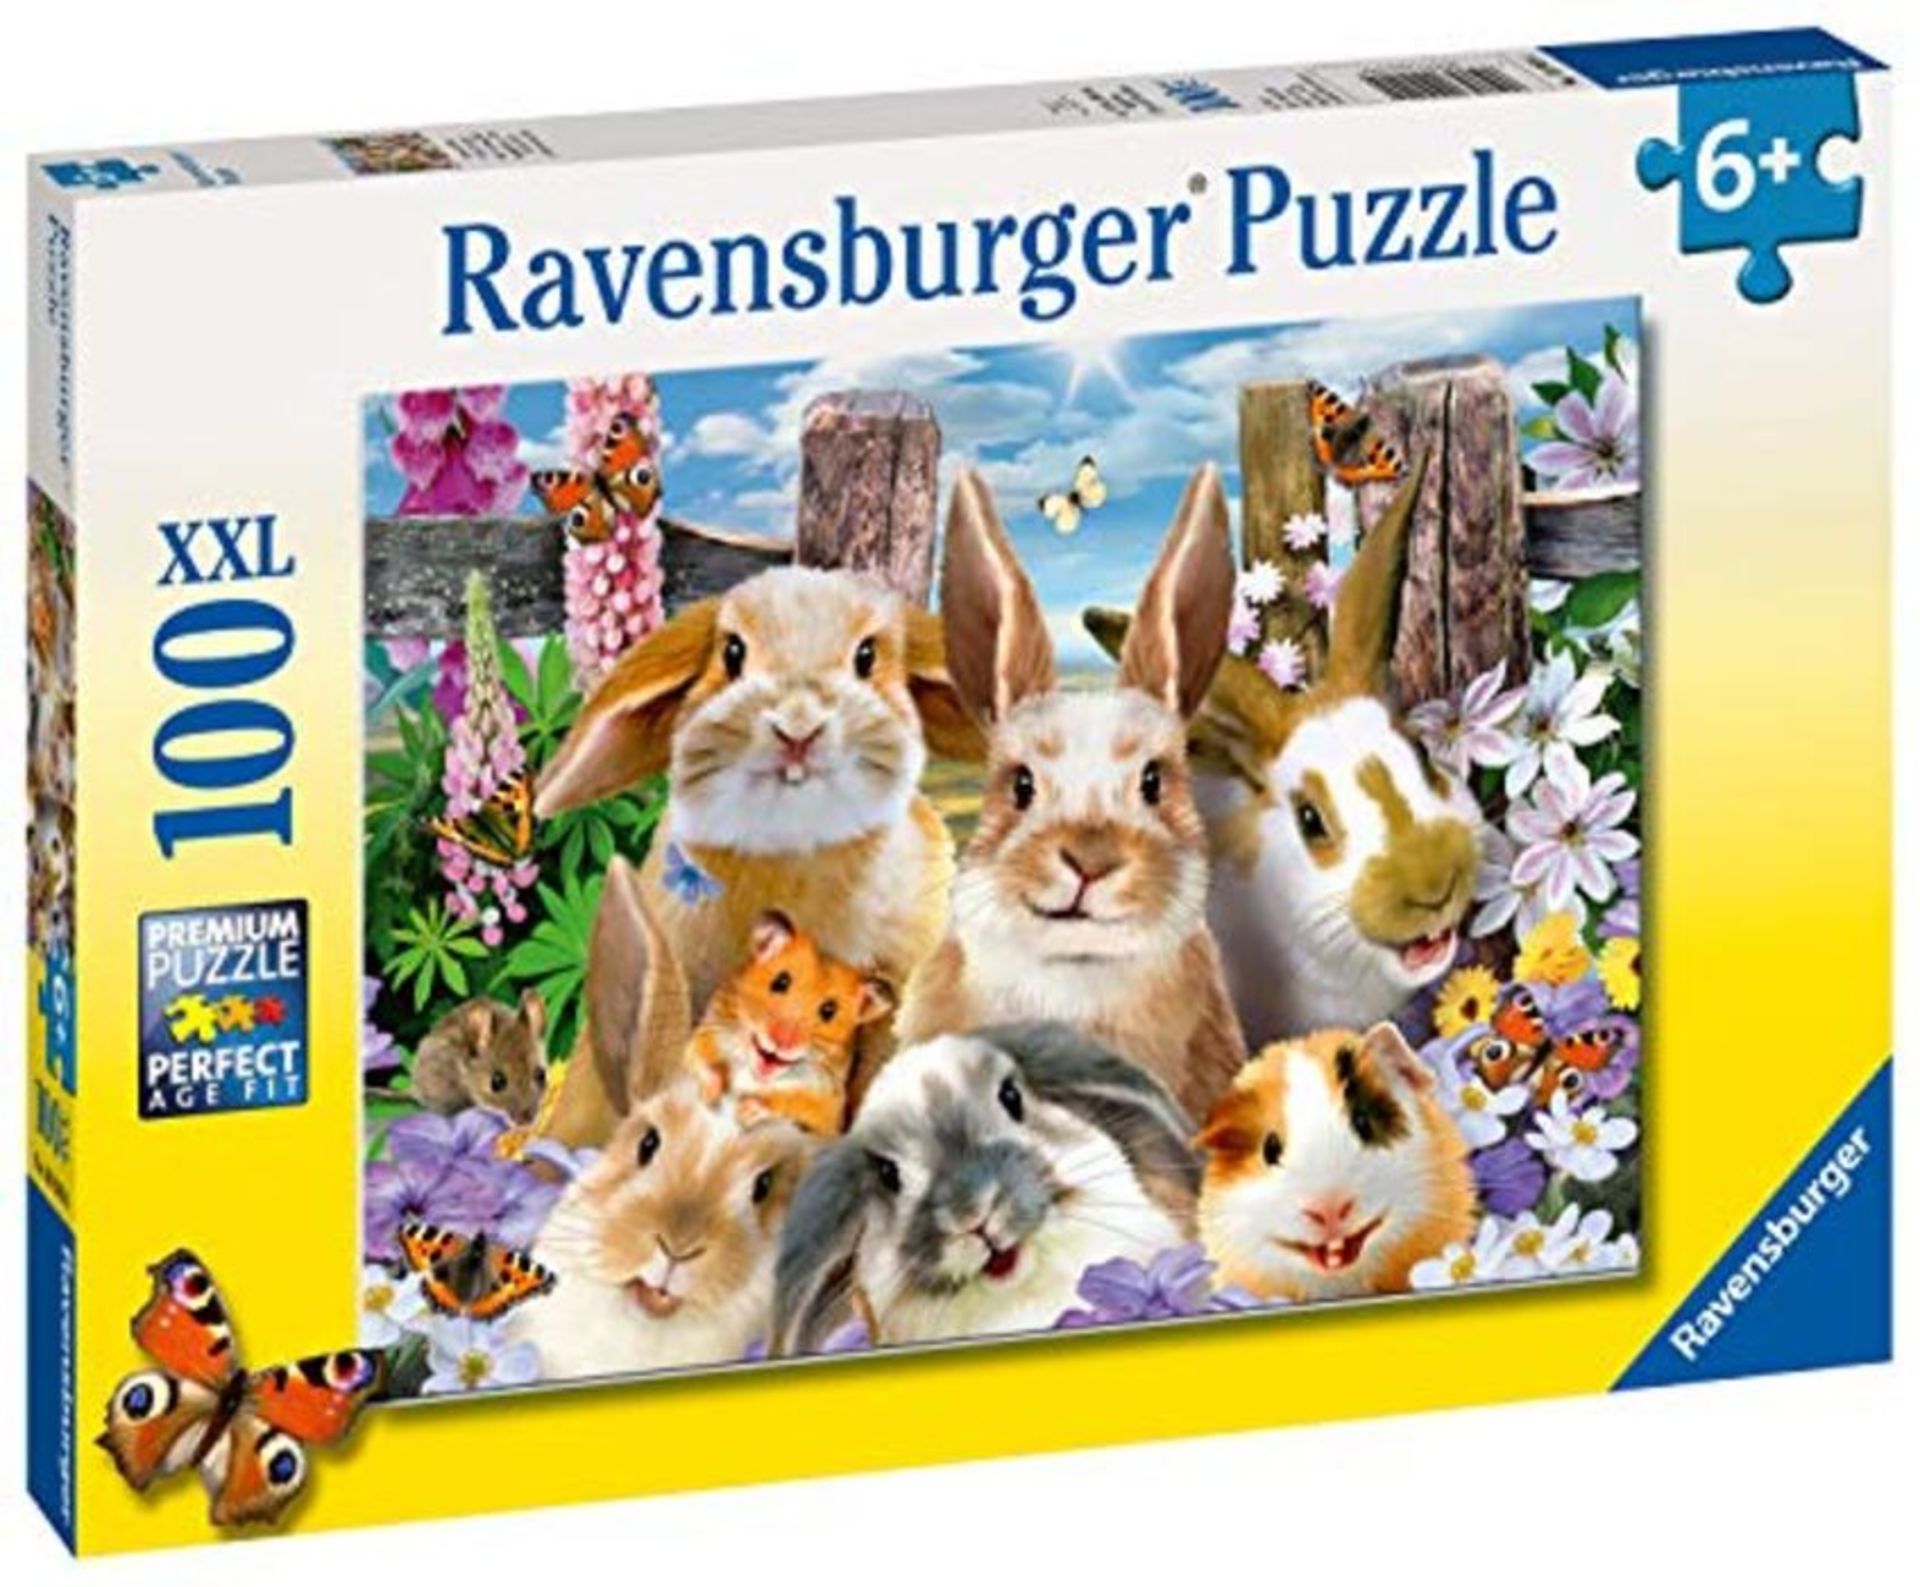 Ravensburger Rabbit Selfies 100 Piece Jigsaw Puzzle with Extra Large Pieces for Kids A